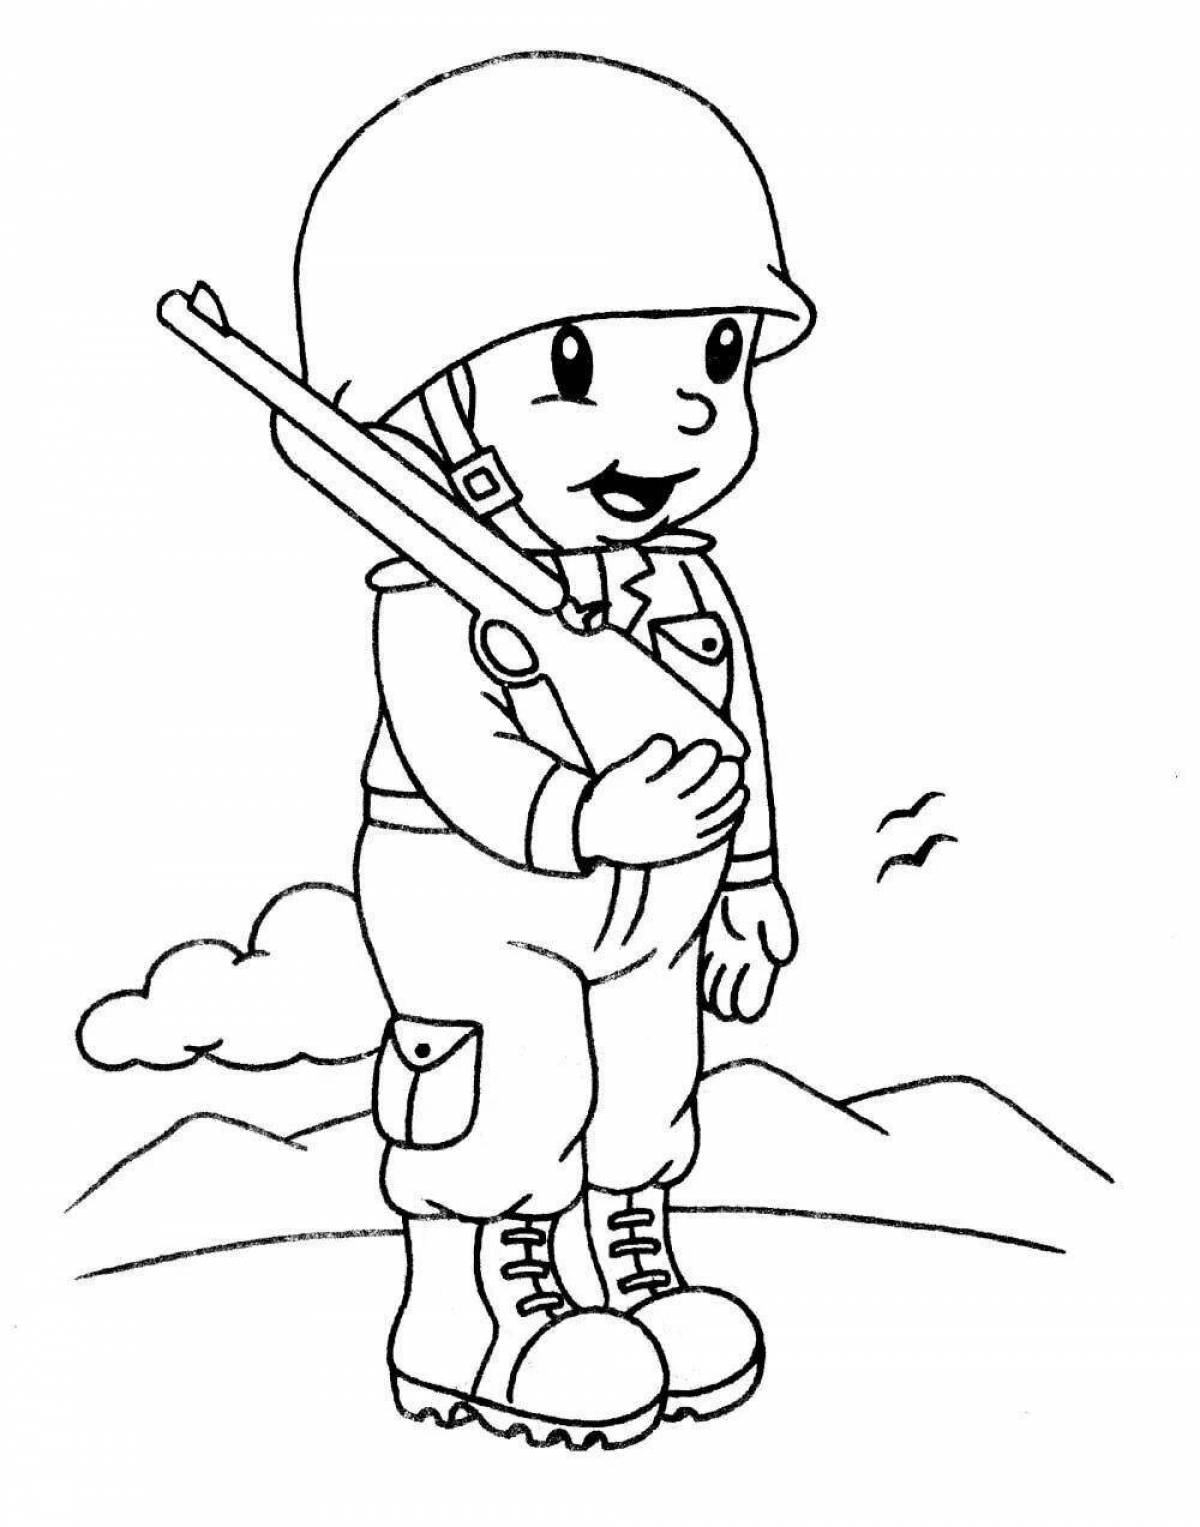 Glowing soldier and children's coloring